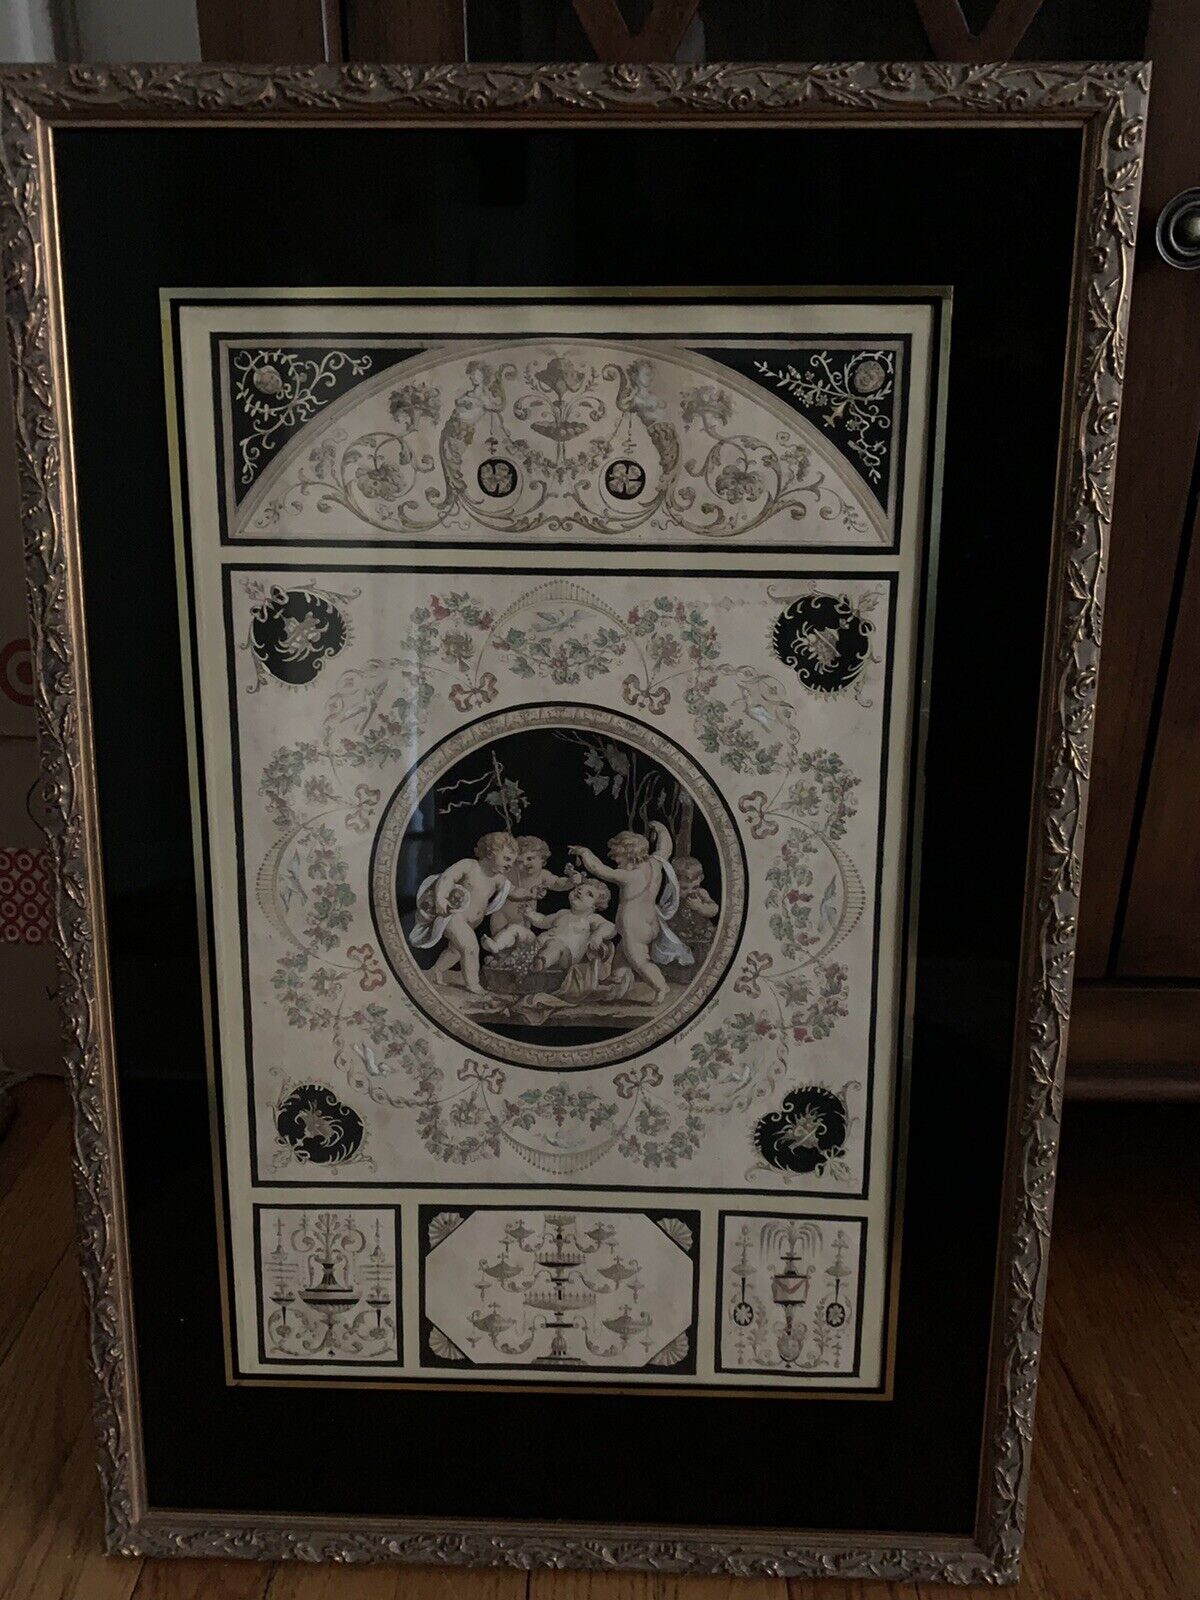 THREE ANTIQUE 18th CENTURY ITALIAN HAND-COLORED ENGRAVINGS - MATTED AND FRAMED Без бренда